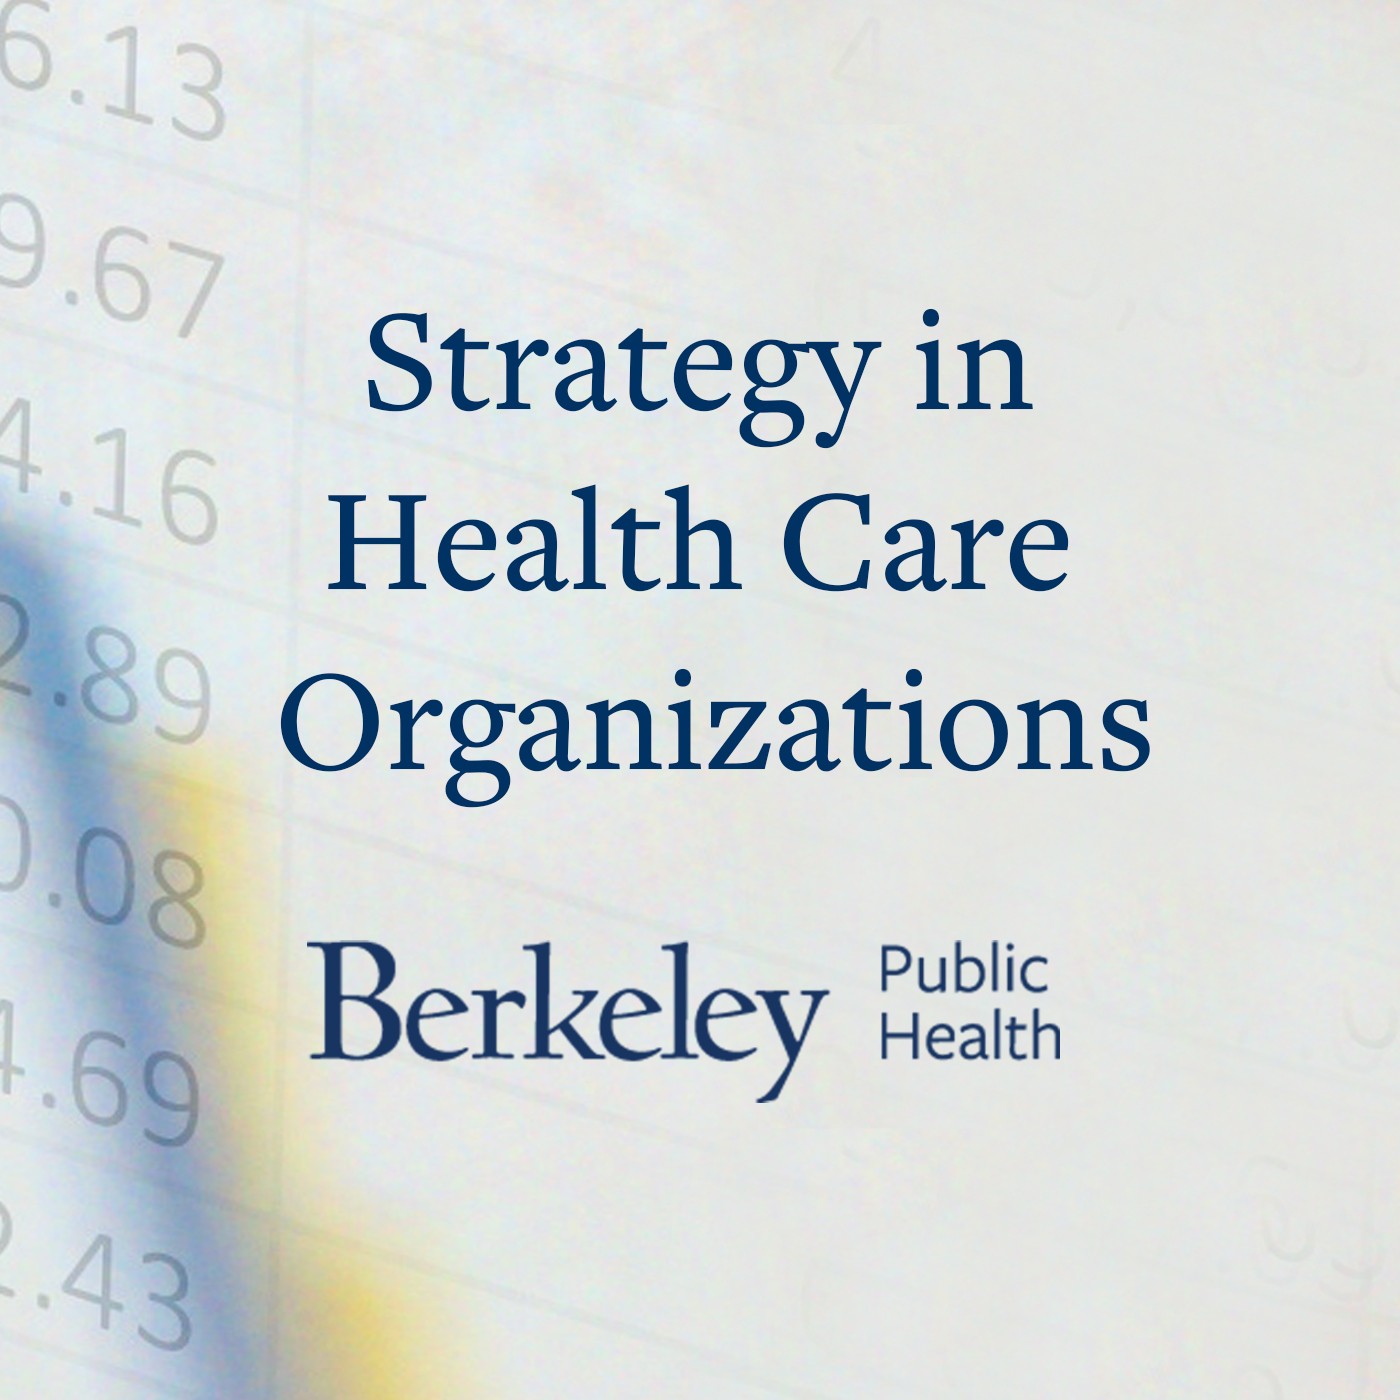 Strategy in Health Care Organizations